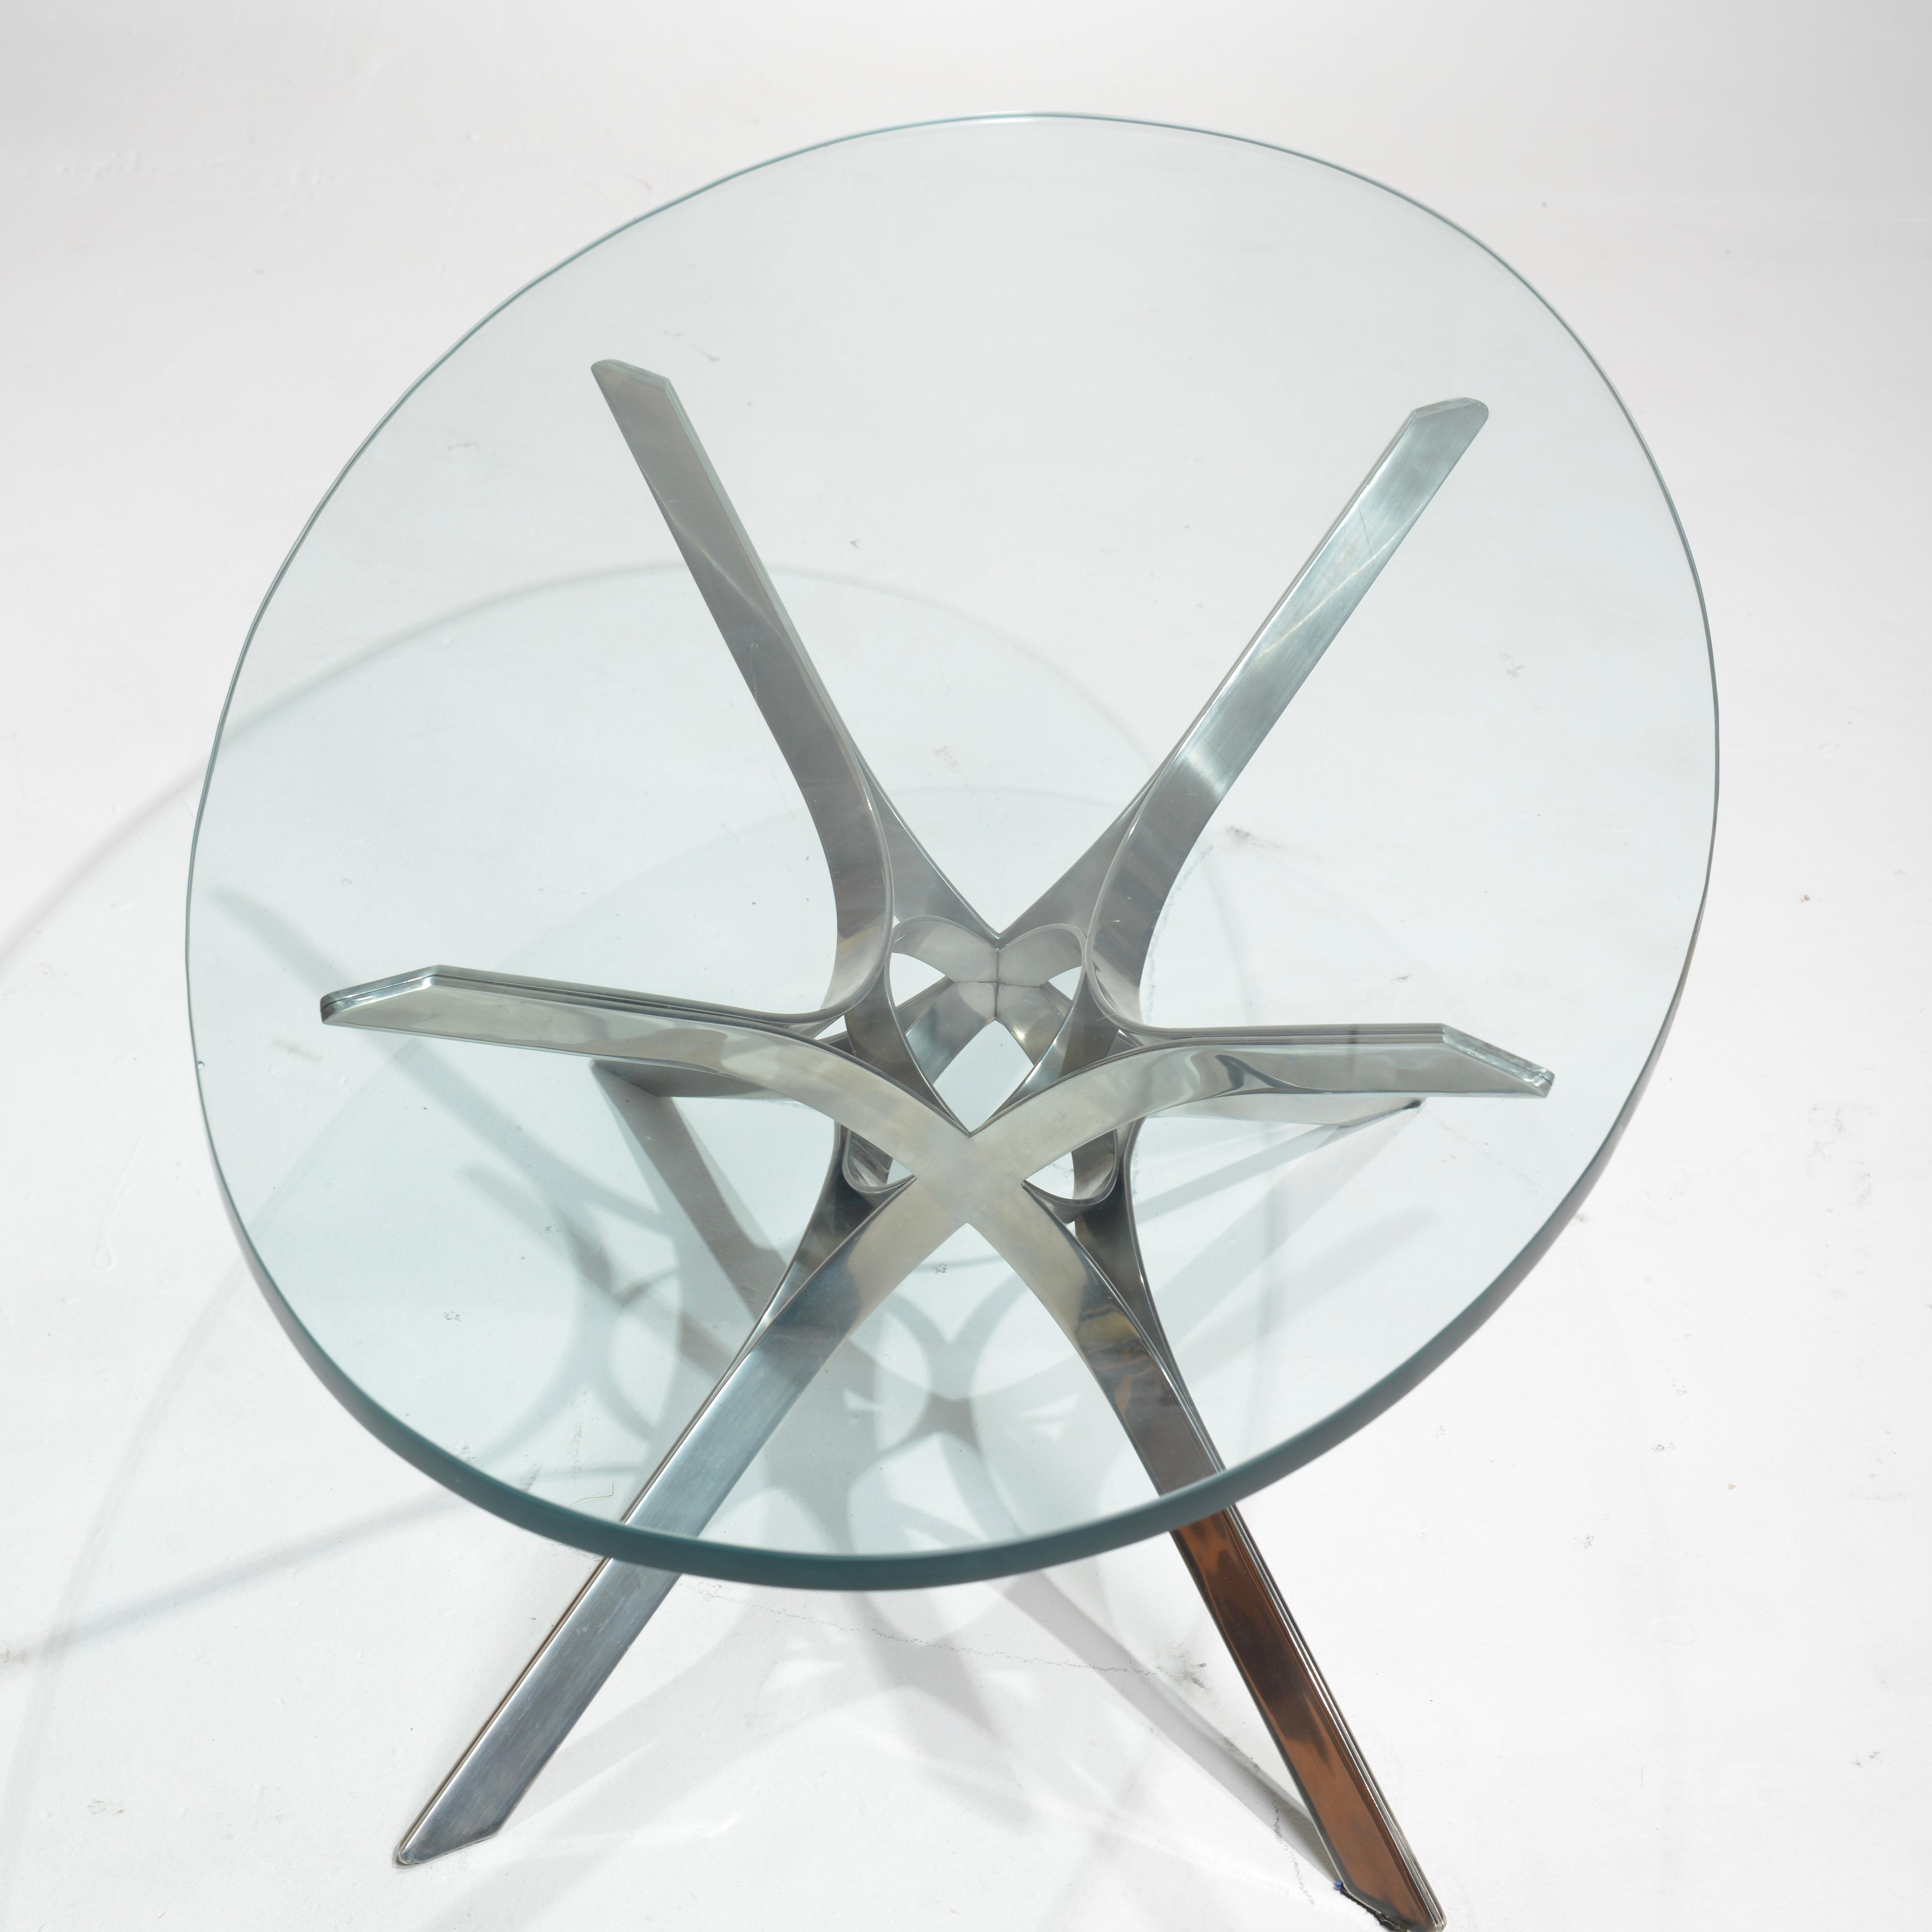 Late 20th Century Sculptural Stainless Steel and Glass Coffee Table by Roger Sprunger for Dunbar For Sale